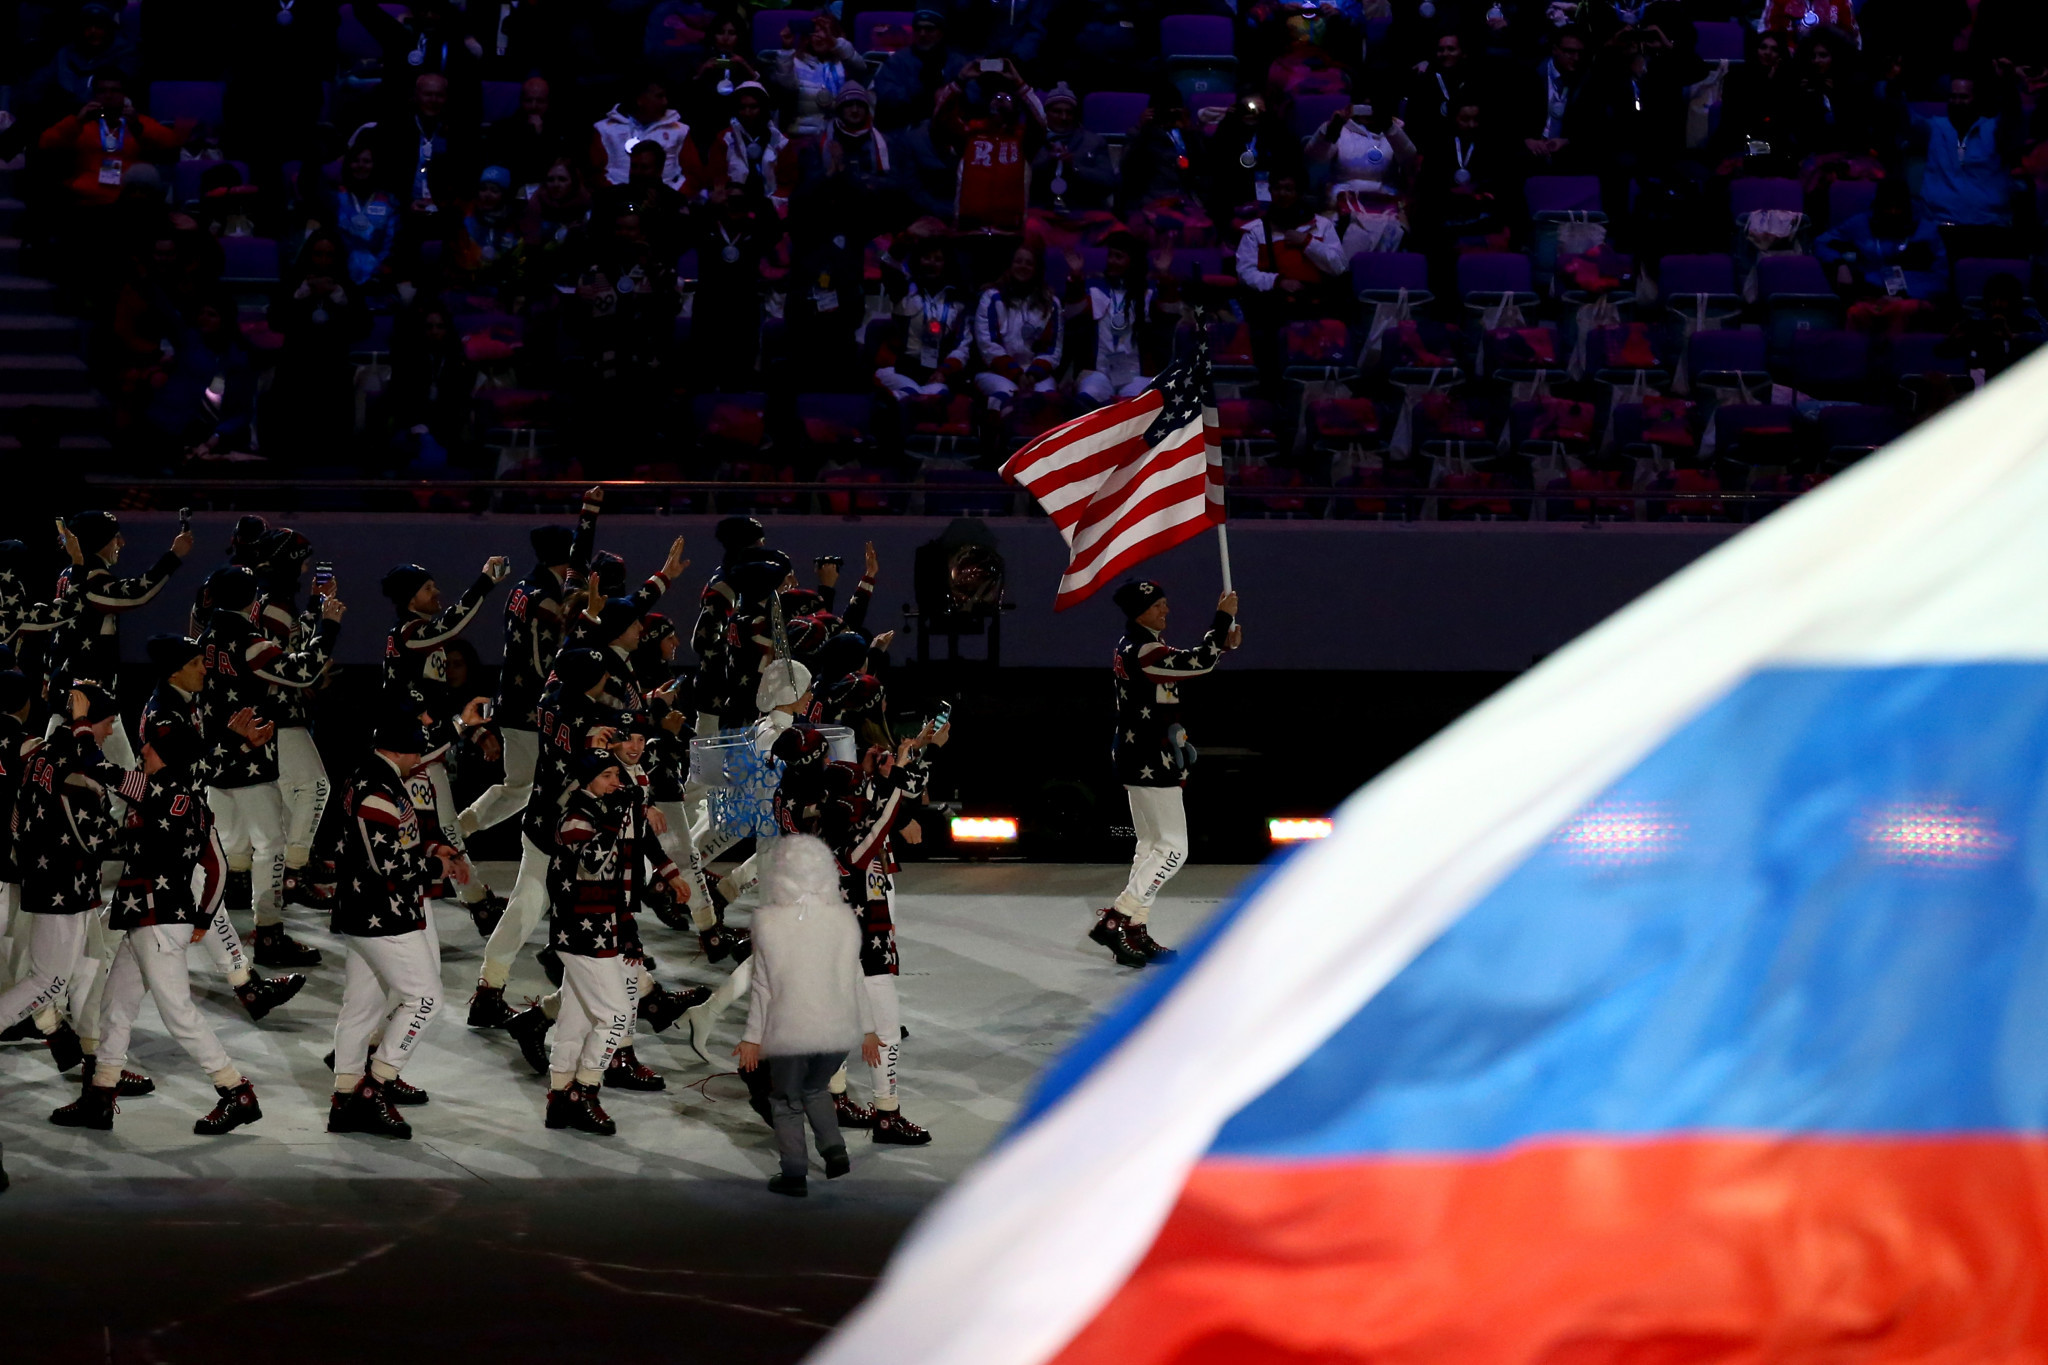 Russian Deputy Prime Minister claims IOC subject to 